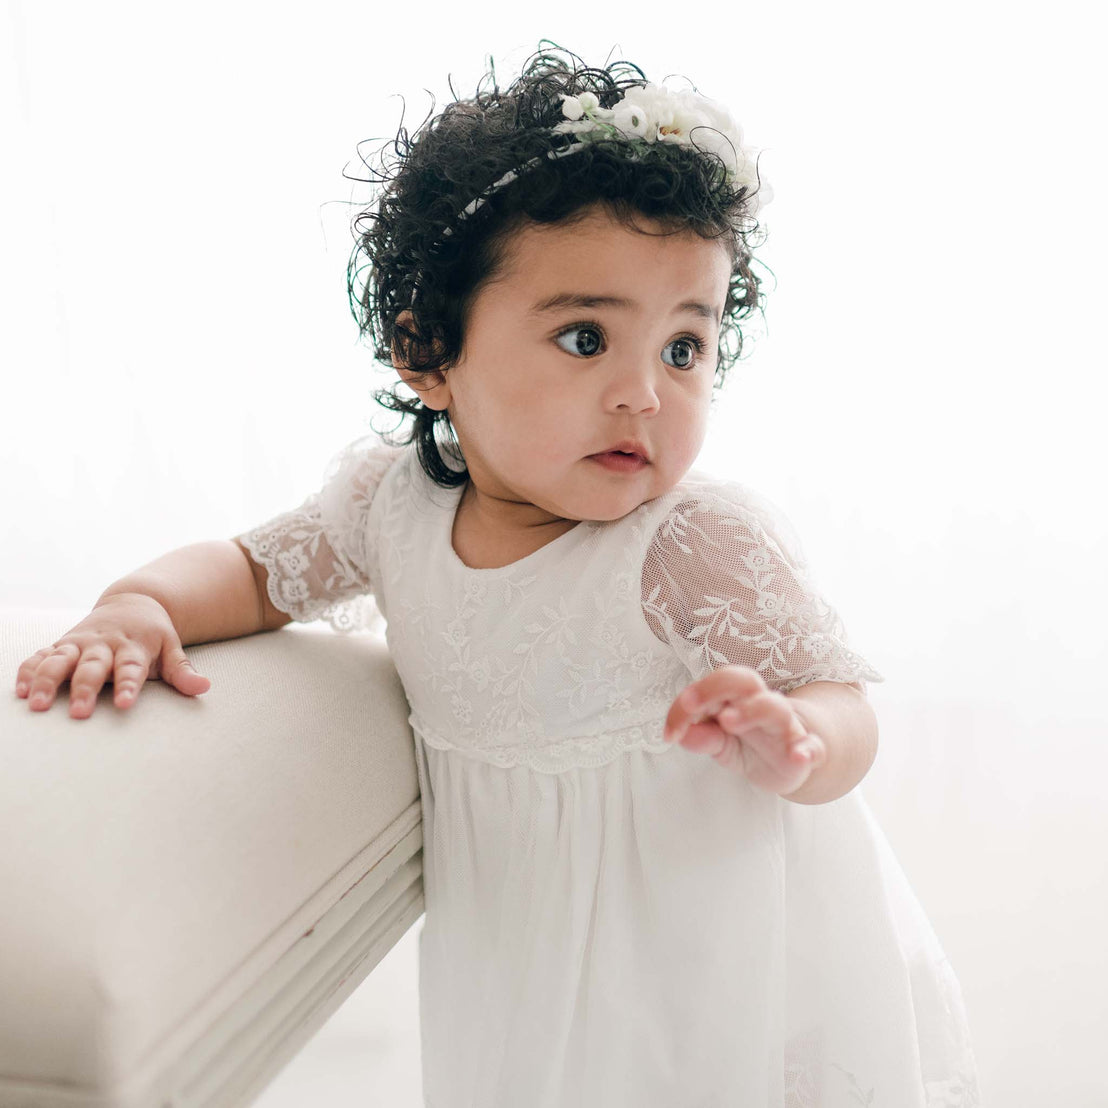 A toddler with curly hair wearing the Ella Romper Dress and a floral headband leans on a cream sofa, looking curiously to the side with wide eyes.